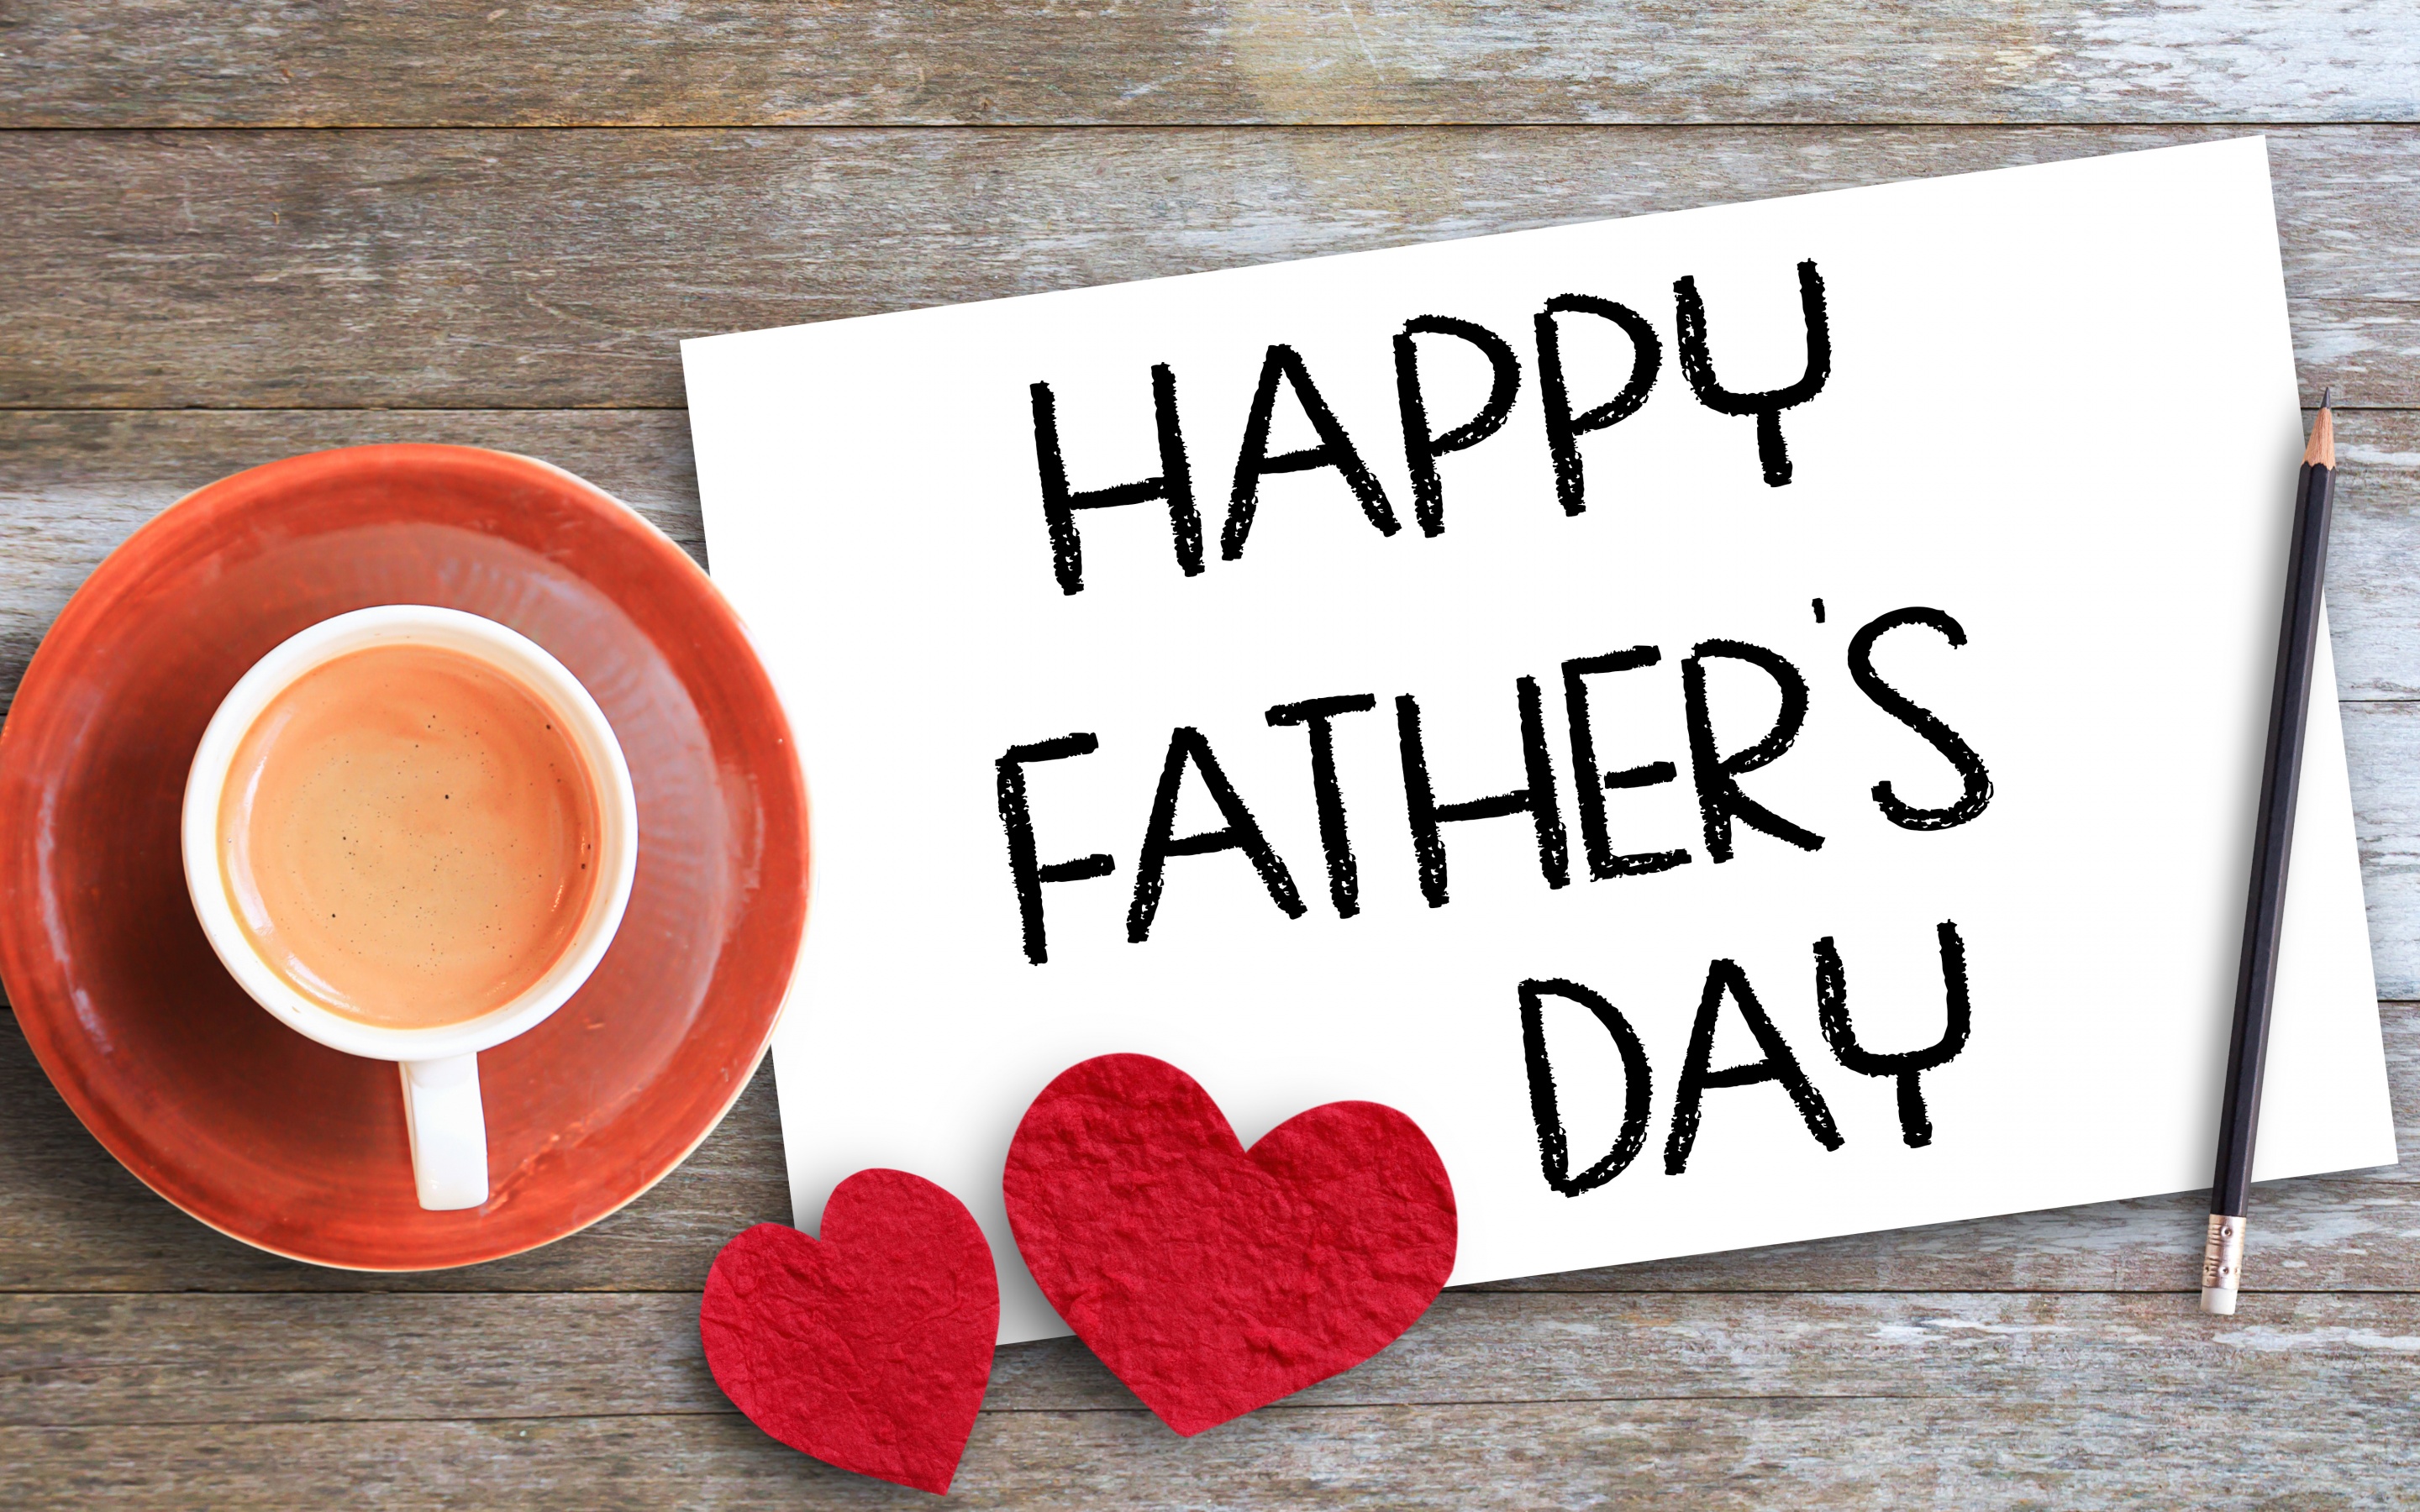 Happy Fathers Day Wallpaper 4K, Greeting Card, Celebrations, #11383